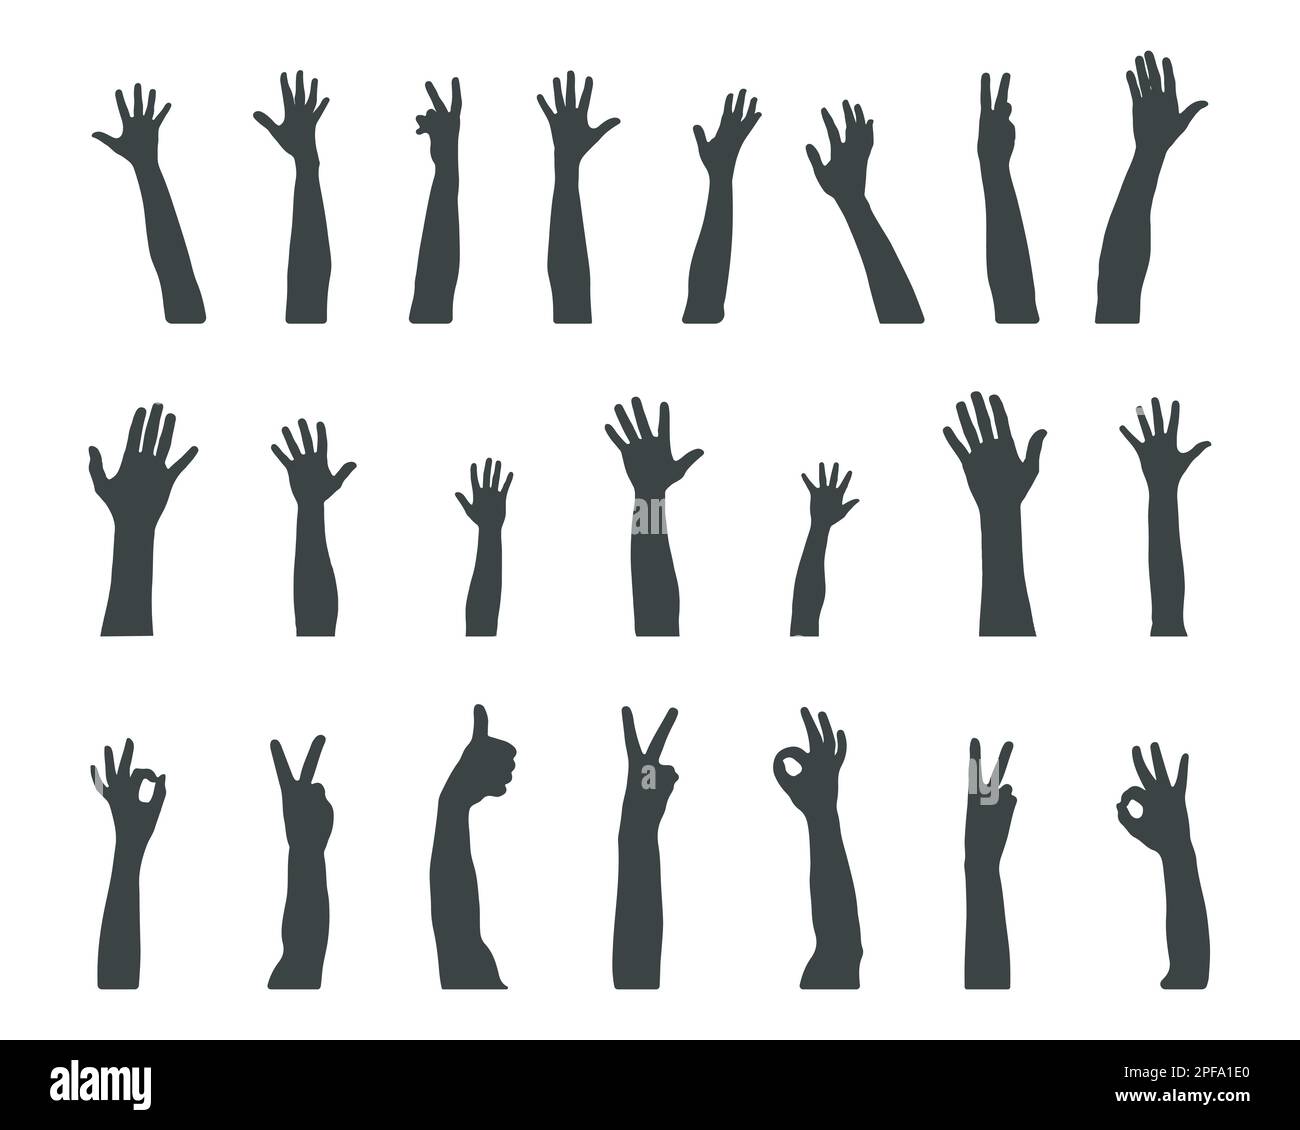 Many hands silhouette, Raised hands vector silhouettes Stock Vector